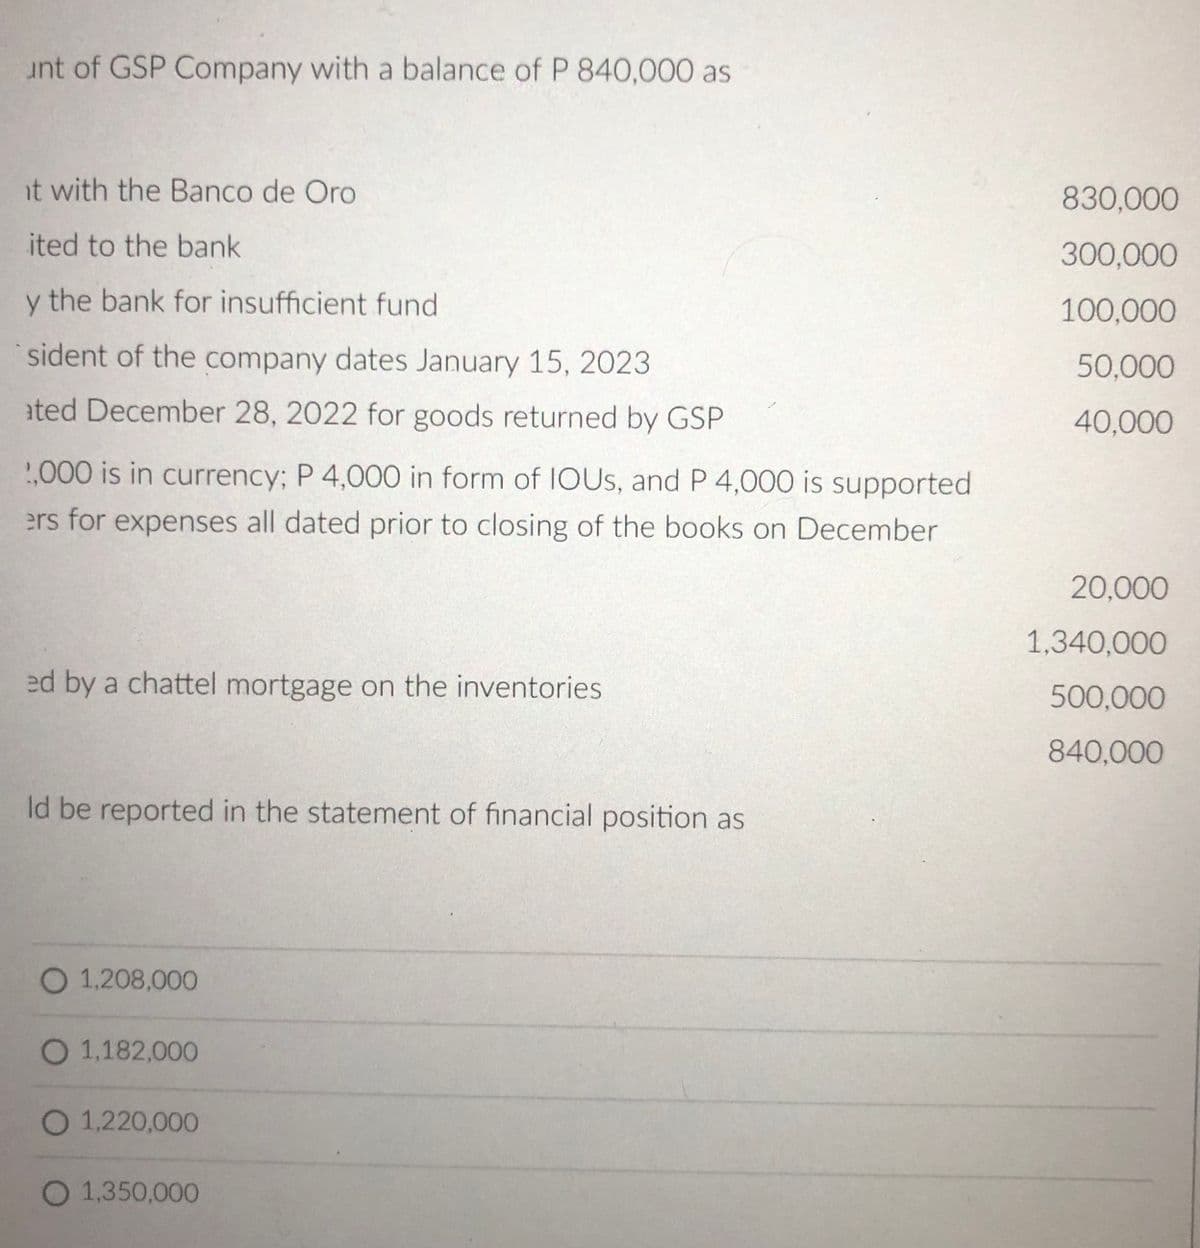 unt of GSP Company with a balance of P 840,000 as
it with the Banco de Oro
830,000
ited to the bank
300,000
y the bank for insufficient fund
100,000
sident of the company dates January 15, 2023
50,000
ated December 28, 2022 for goods returned by GSP
40,000
,000 is in currency; P 4,000 in form of IOUS, and P 4,000 is supported
ers for expenses all dated prior to closing of the books on December
20,000
1,340,000
ed by a chattel mortgage on the inventories
500,000
840,000
ld be reported in the statement of financial position as
O 1,208,000
O 1,182,000
O 1,220,000
O 1,350,000
